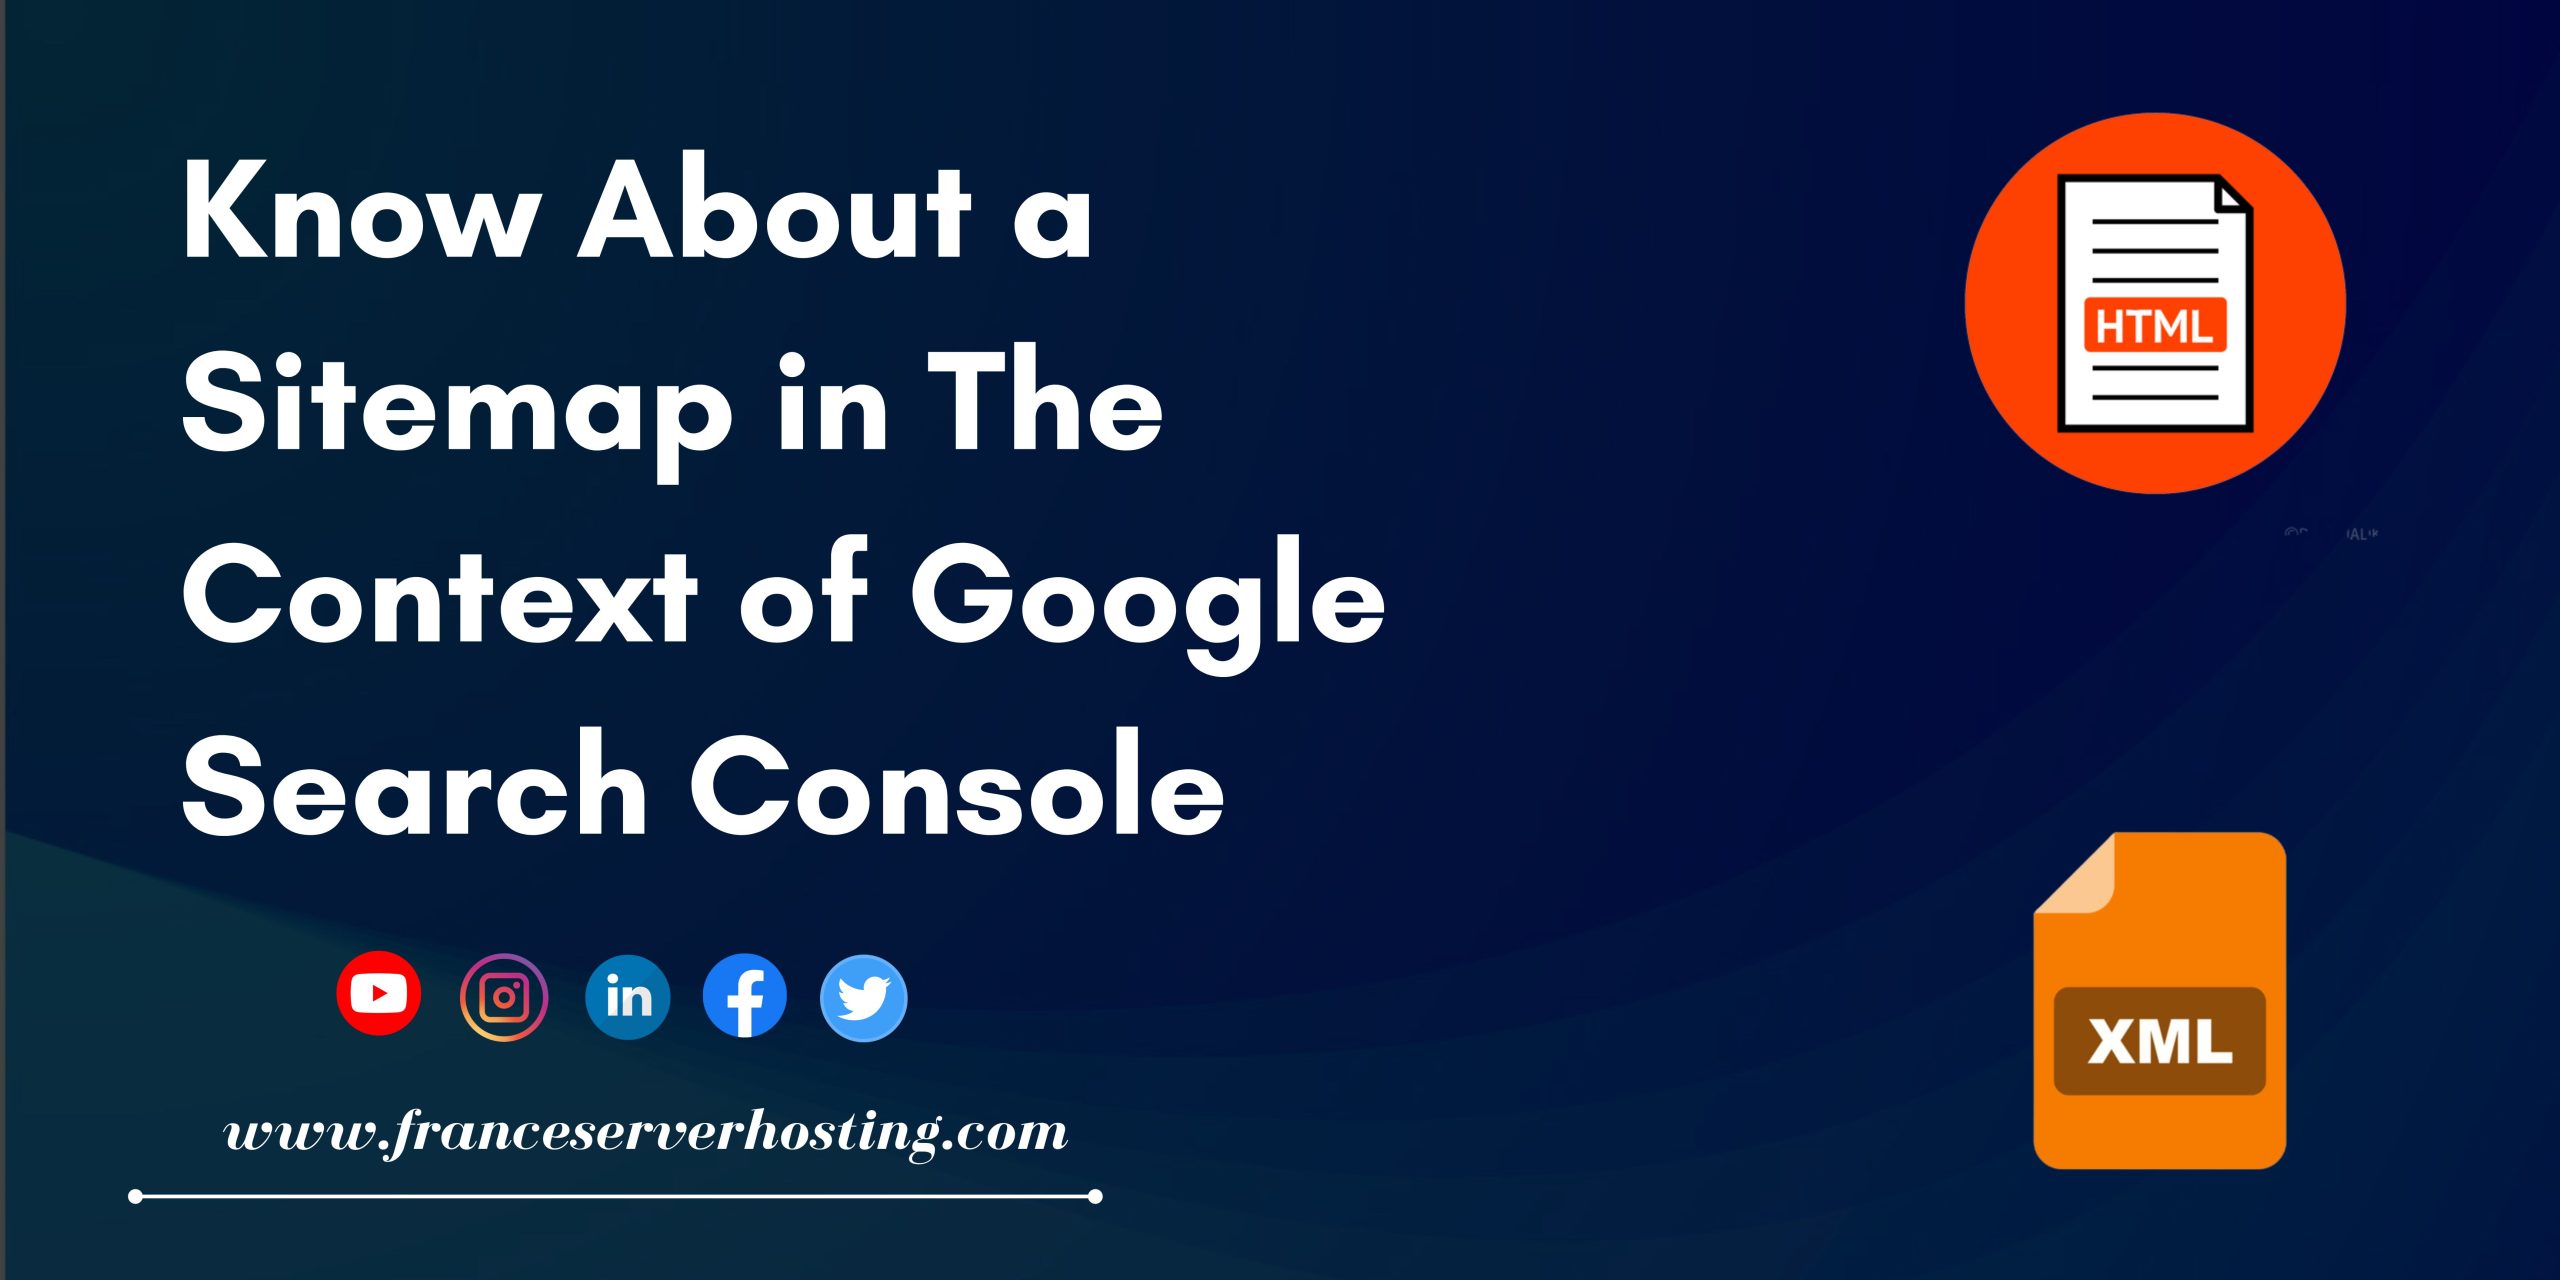 Know about a sitemap in the context of Google Search Console